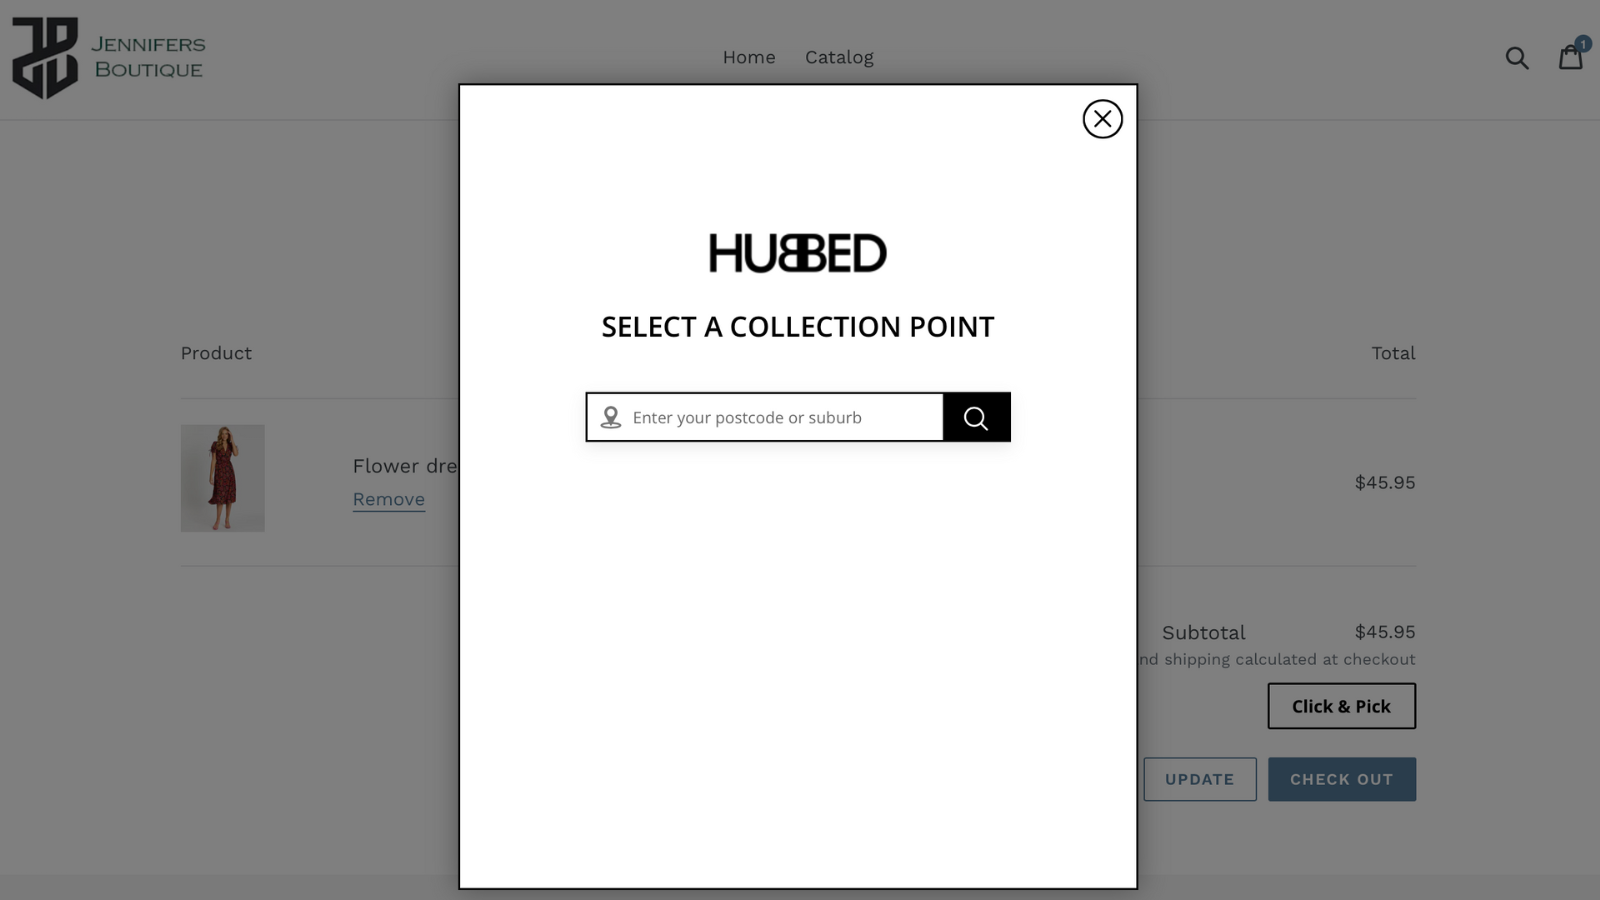 Select a parcel collection point with HUBBED Click & Pick